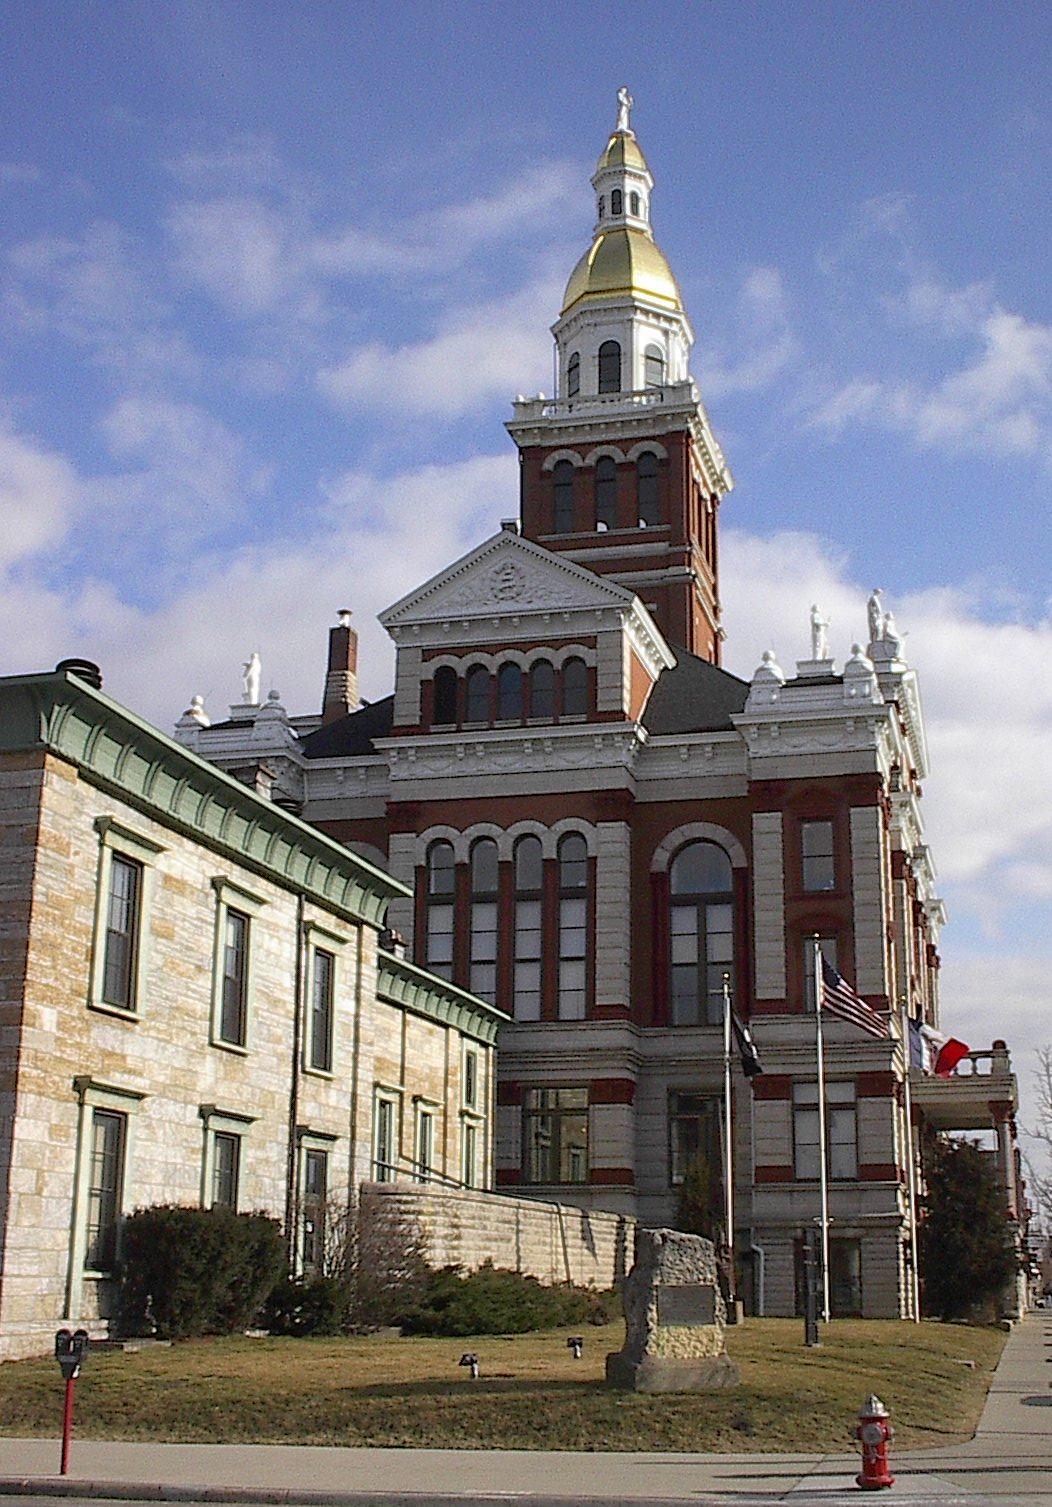 OLD JAIL AND DUBUQUE COUNTY COURTHOUSE, March 26, 2002